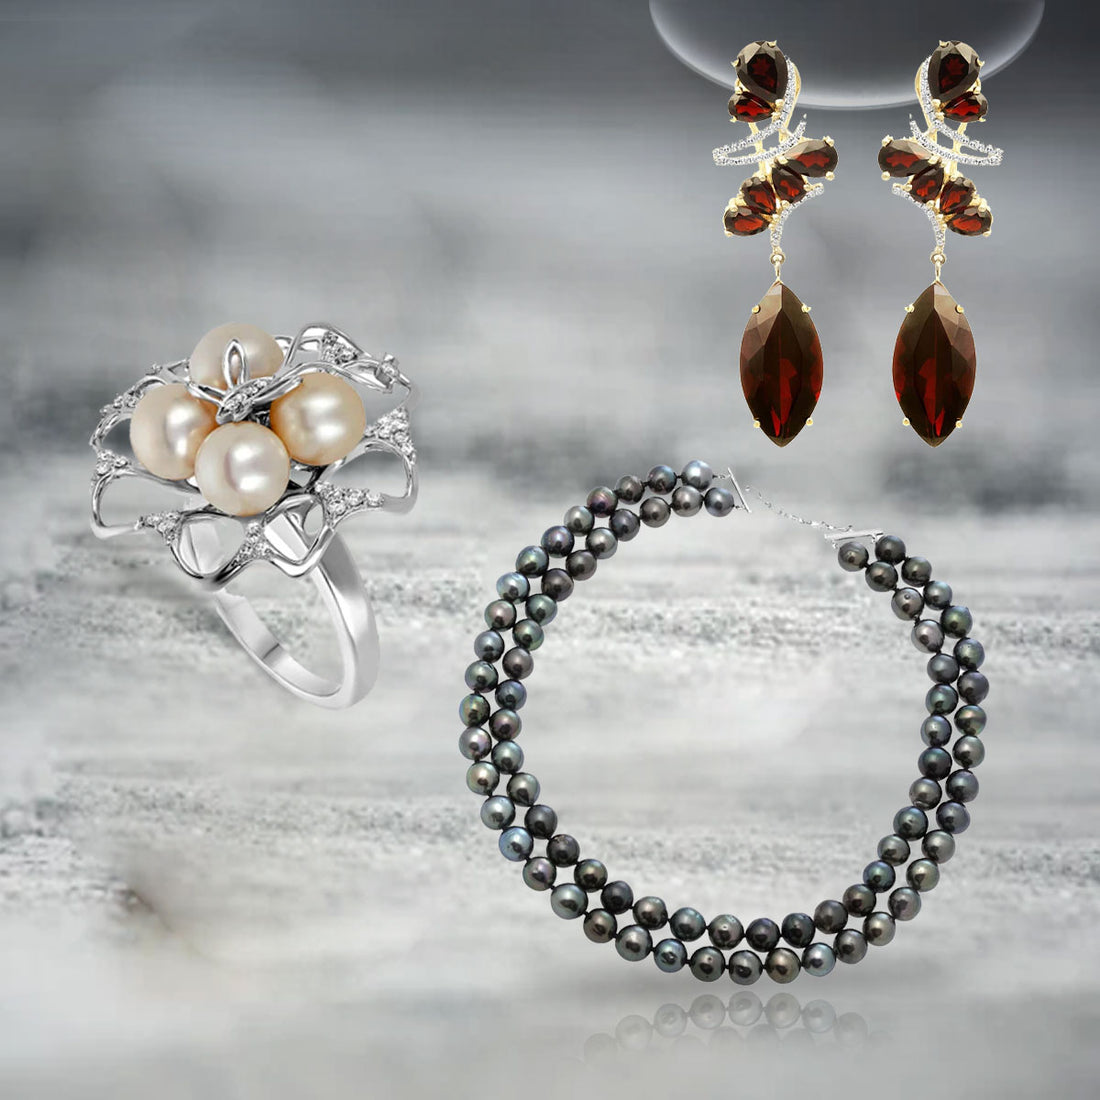 Get that Classy Vintage Look Back with Nehita’s Amazing Pearl Jewelry Items